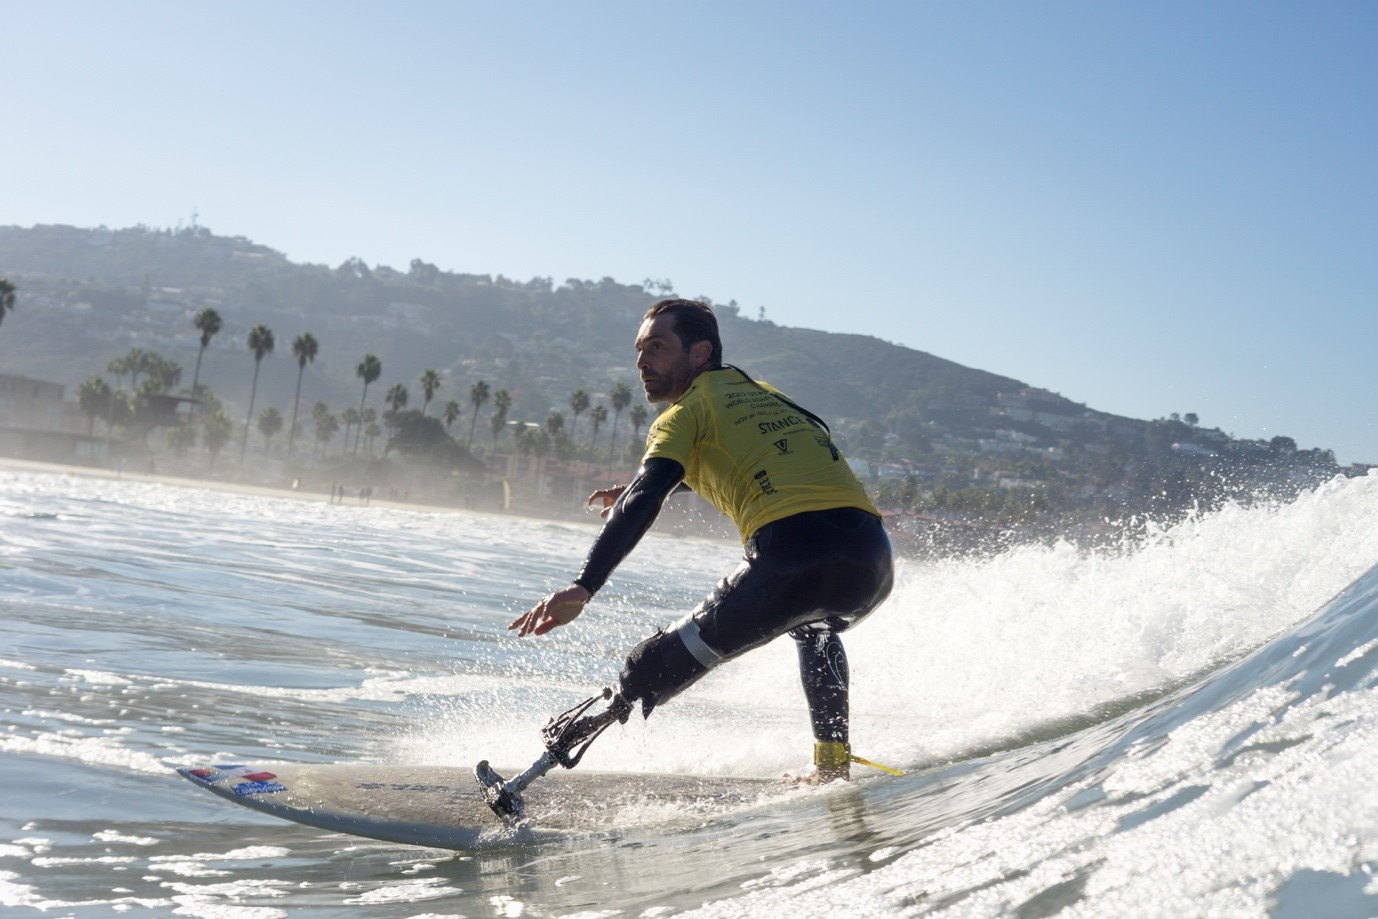 Athletes from 25 national Para-surfing teams are expected to compete at the event in California ©ISA